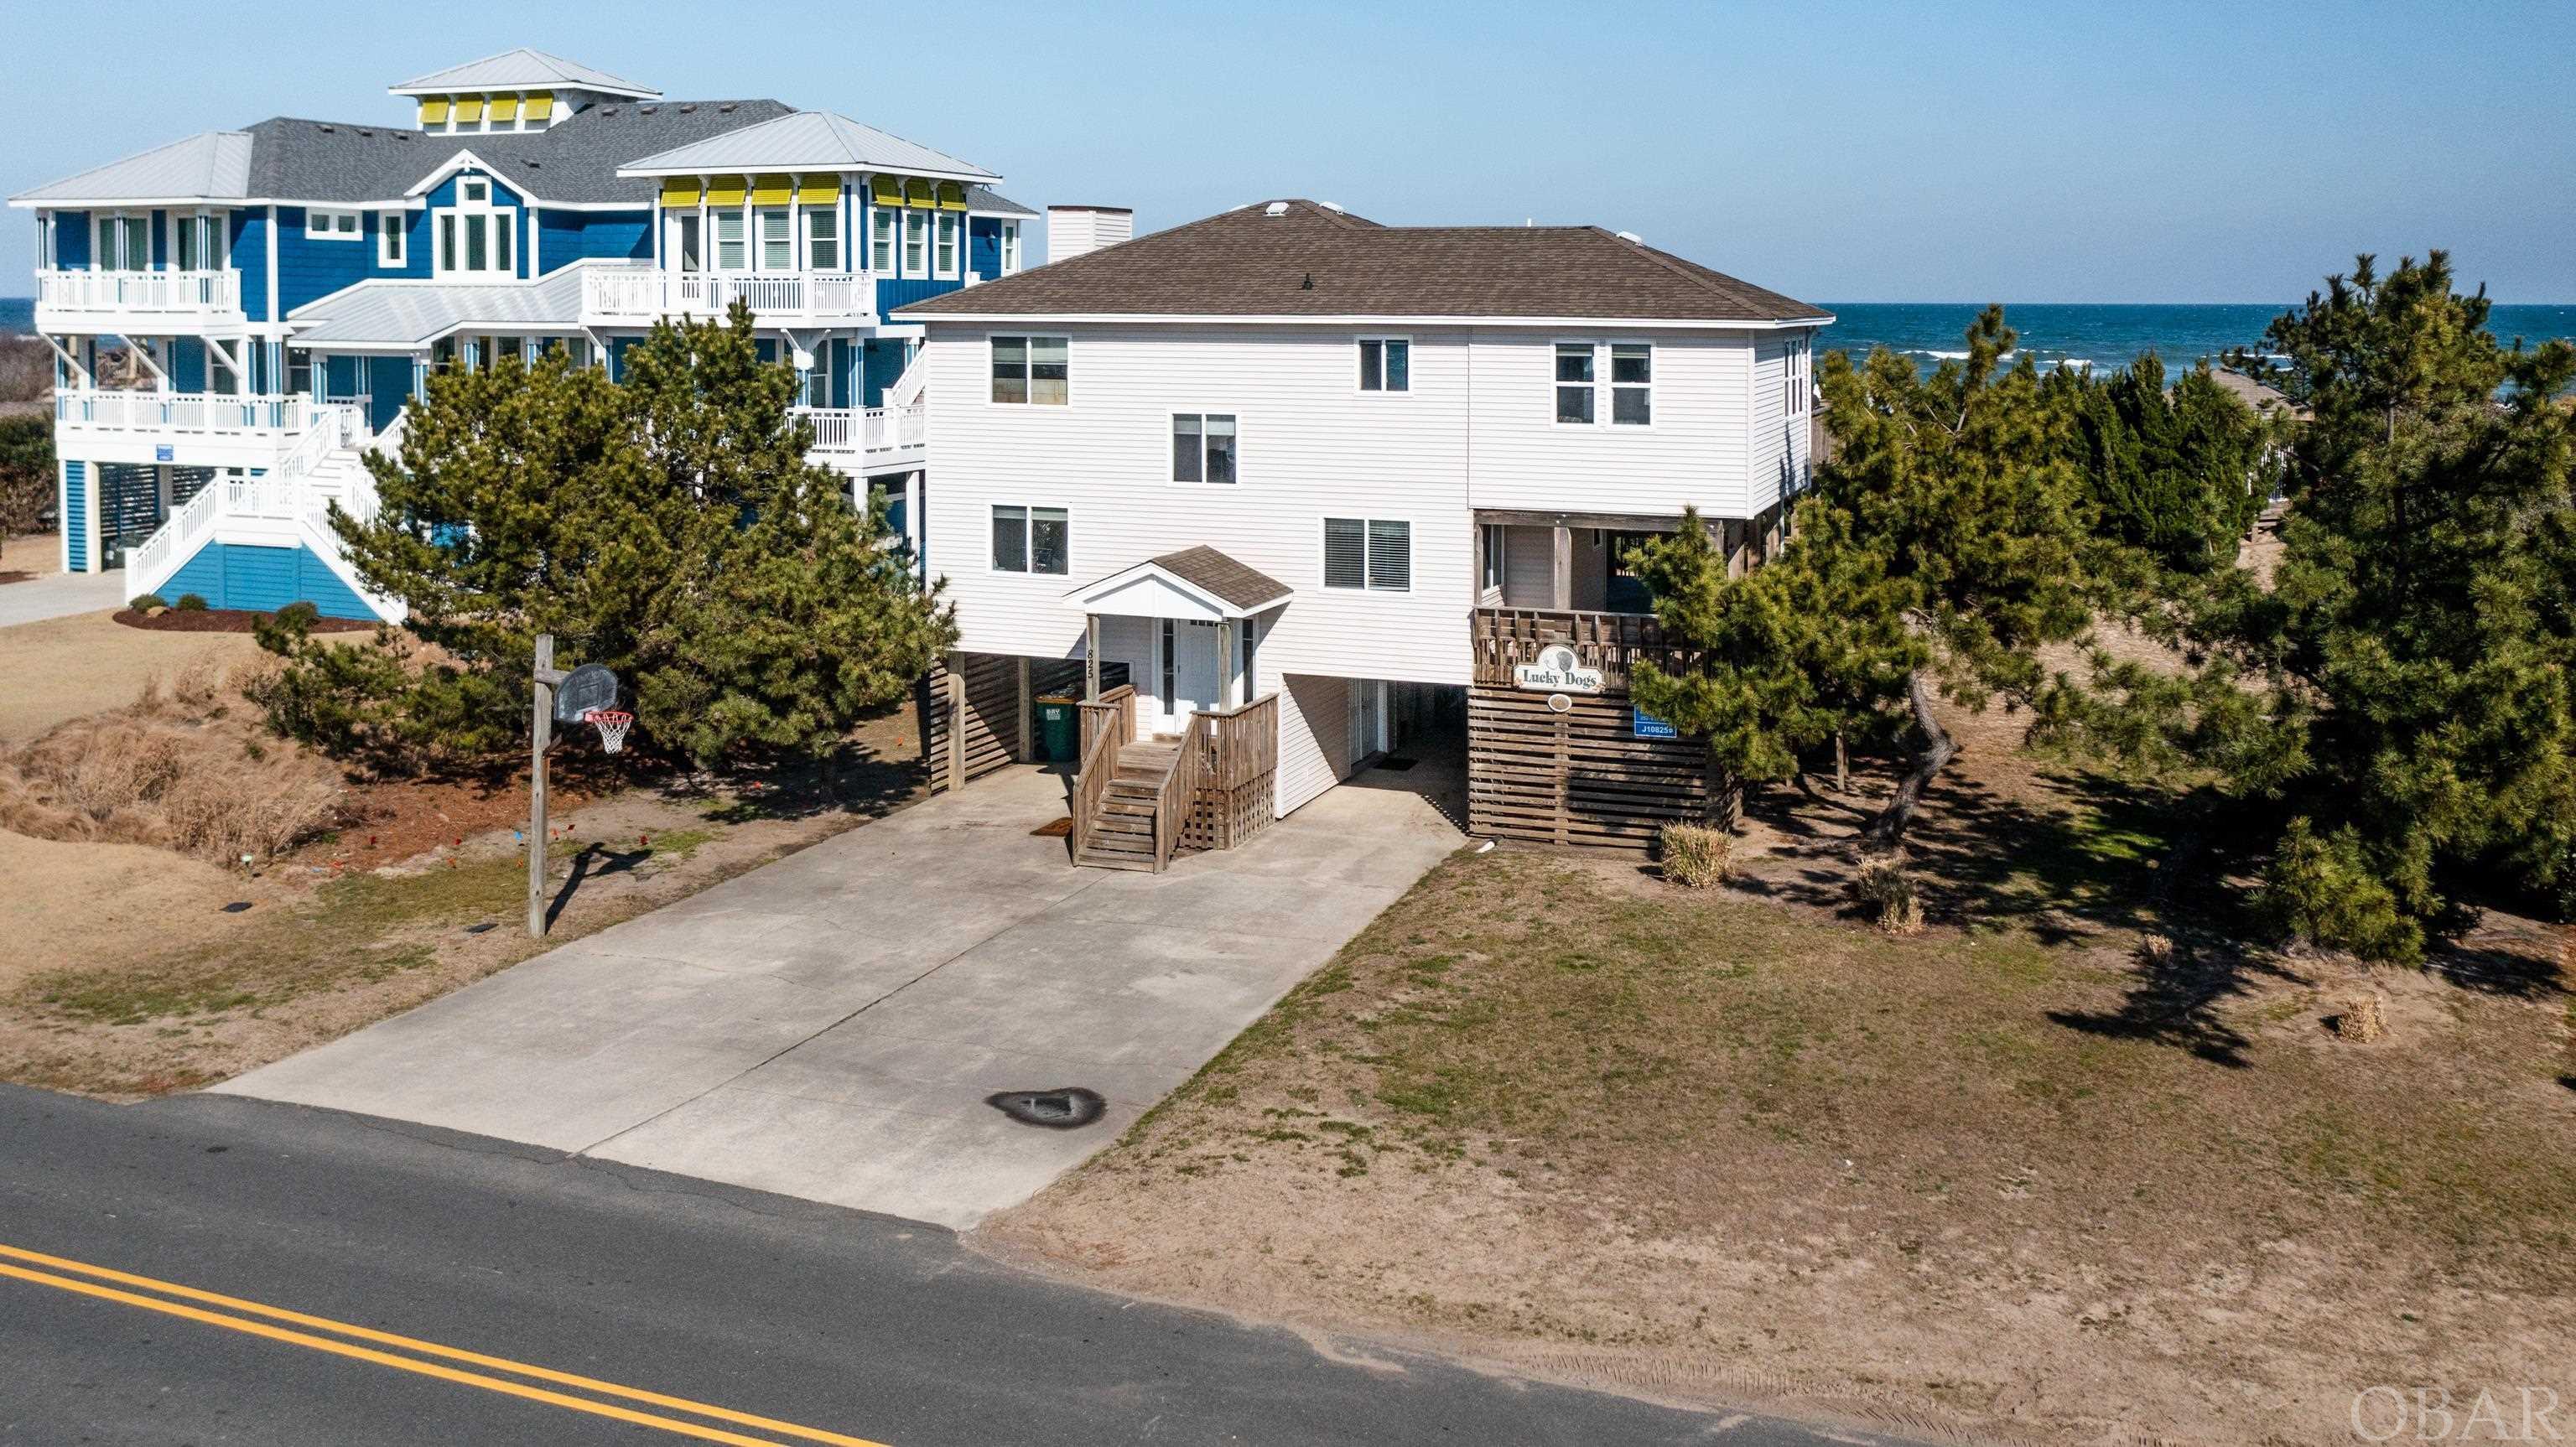 Corolla, North Carolina 27927, 4 Bedrooms Bedrooms, ,3 BathroomsBathrooms,Single family - detached,For sale,Lighthouse Drive,117949